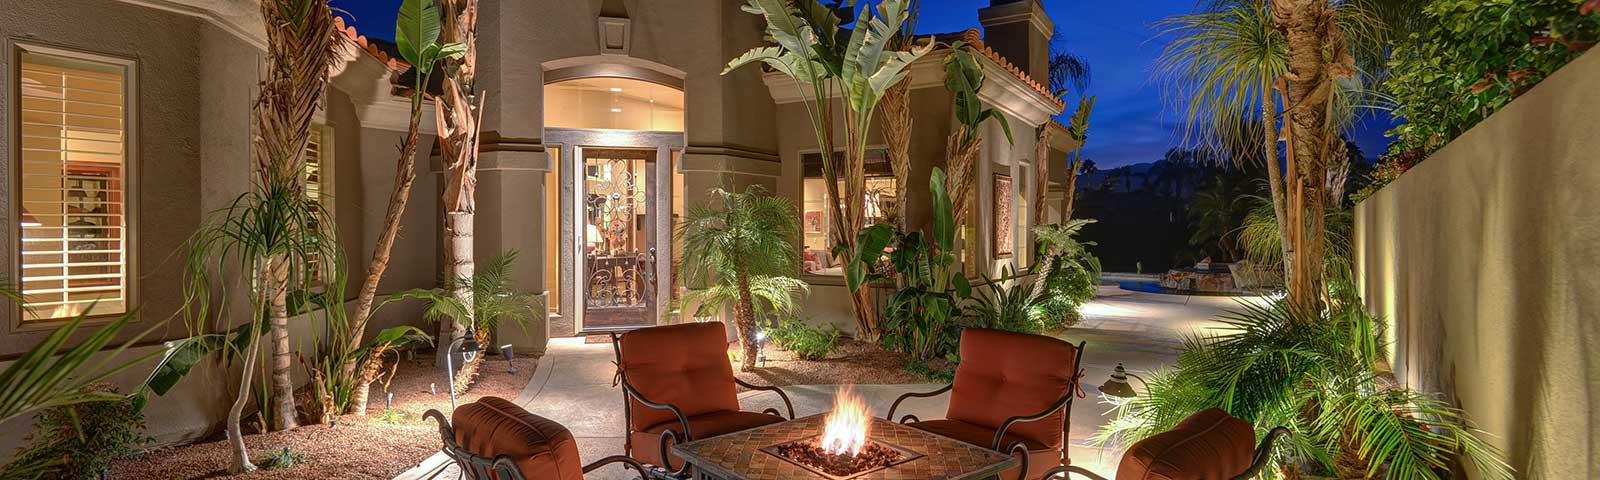 Fire pit outside at night at Indian Ridge Country Club